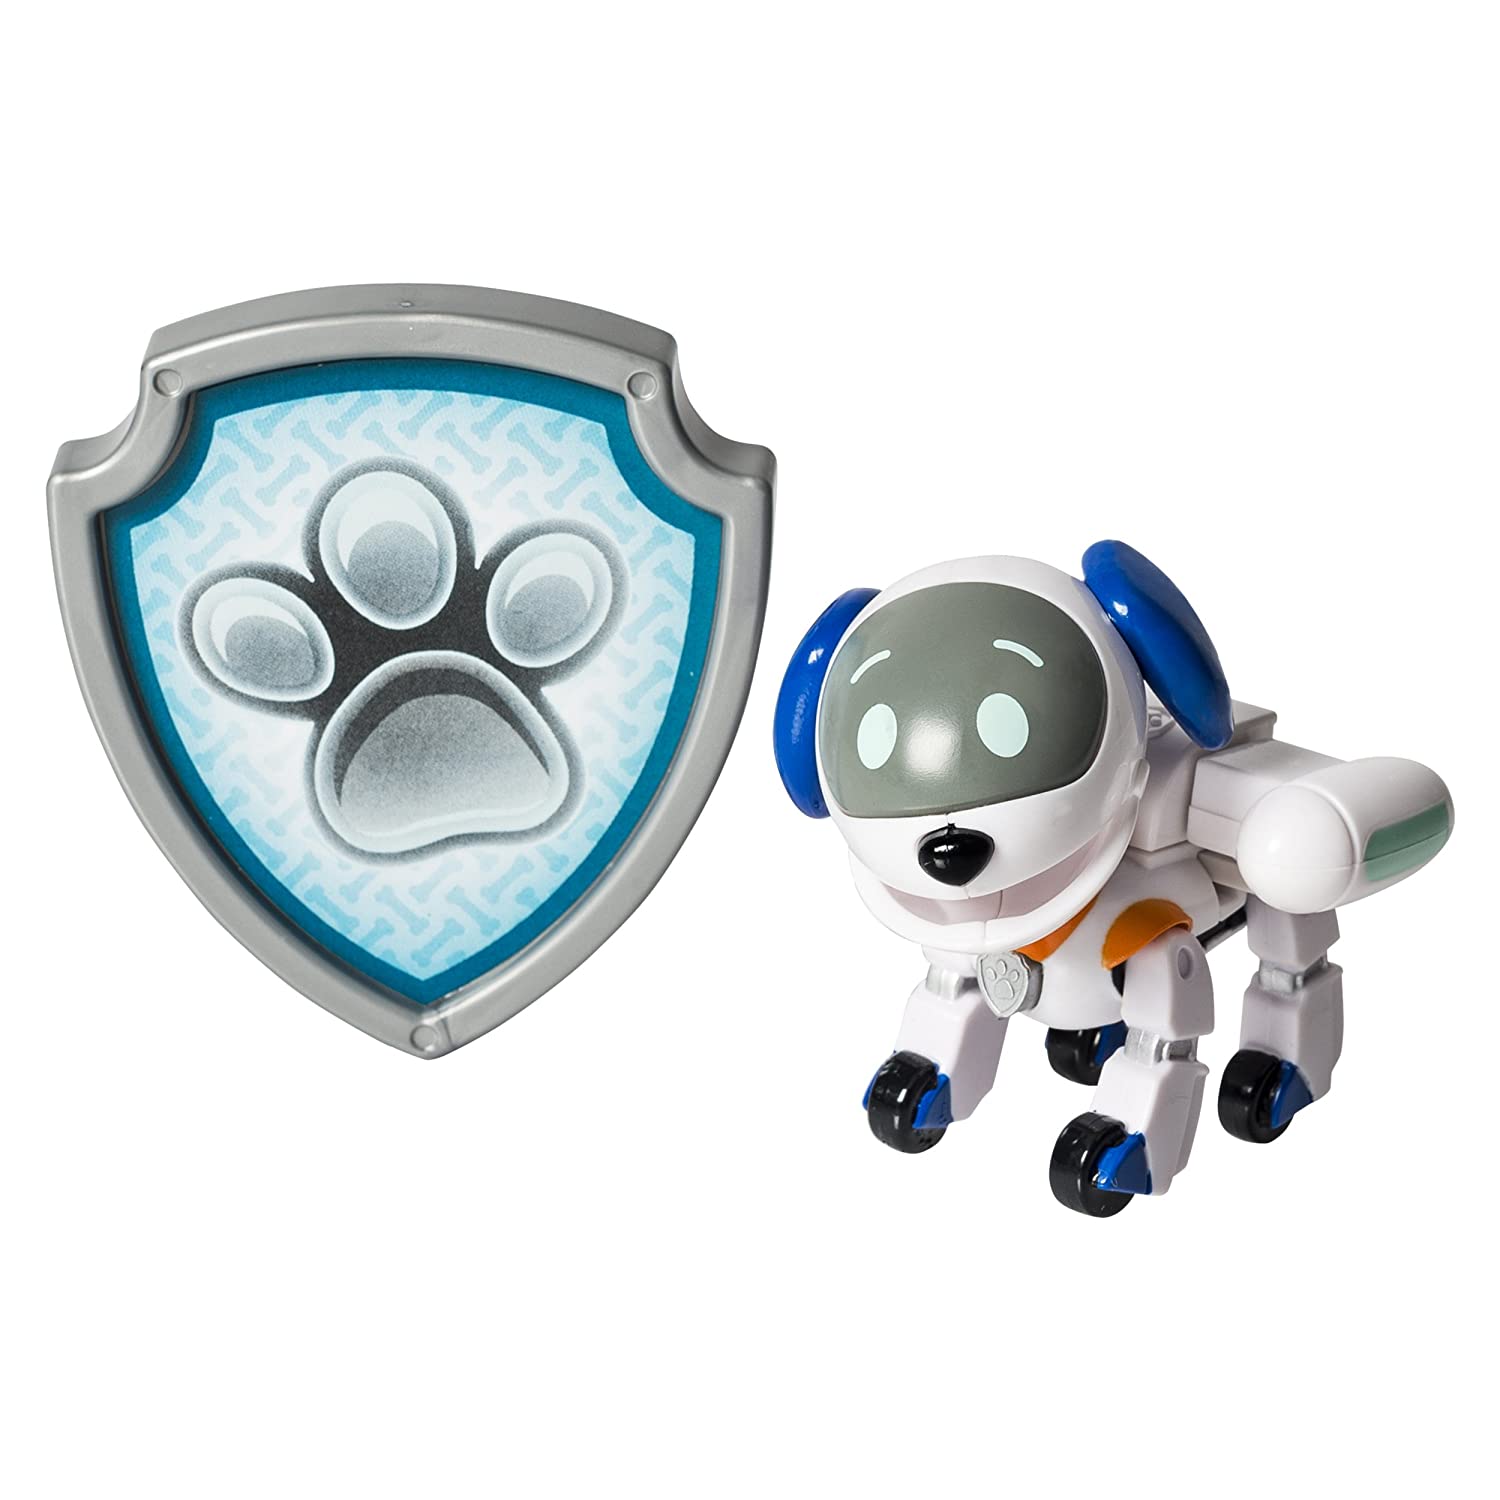 Top 9 Best Robot Pets for Kids Reviews in 2022 1